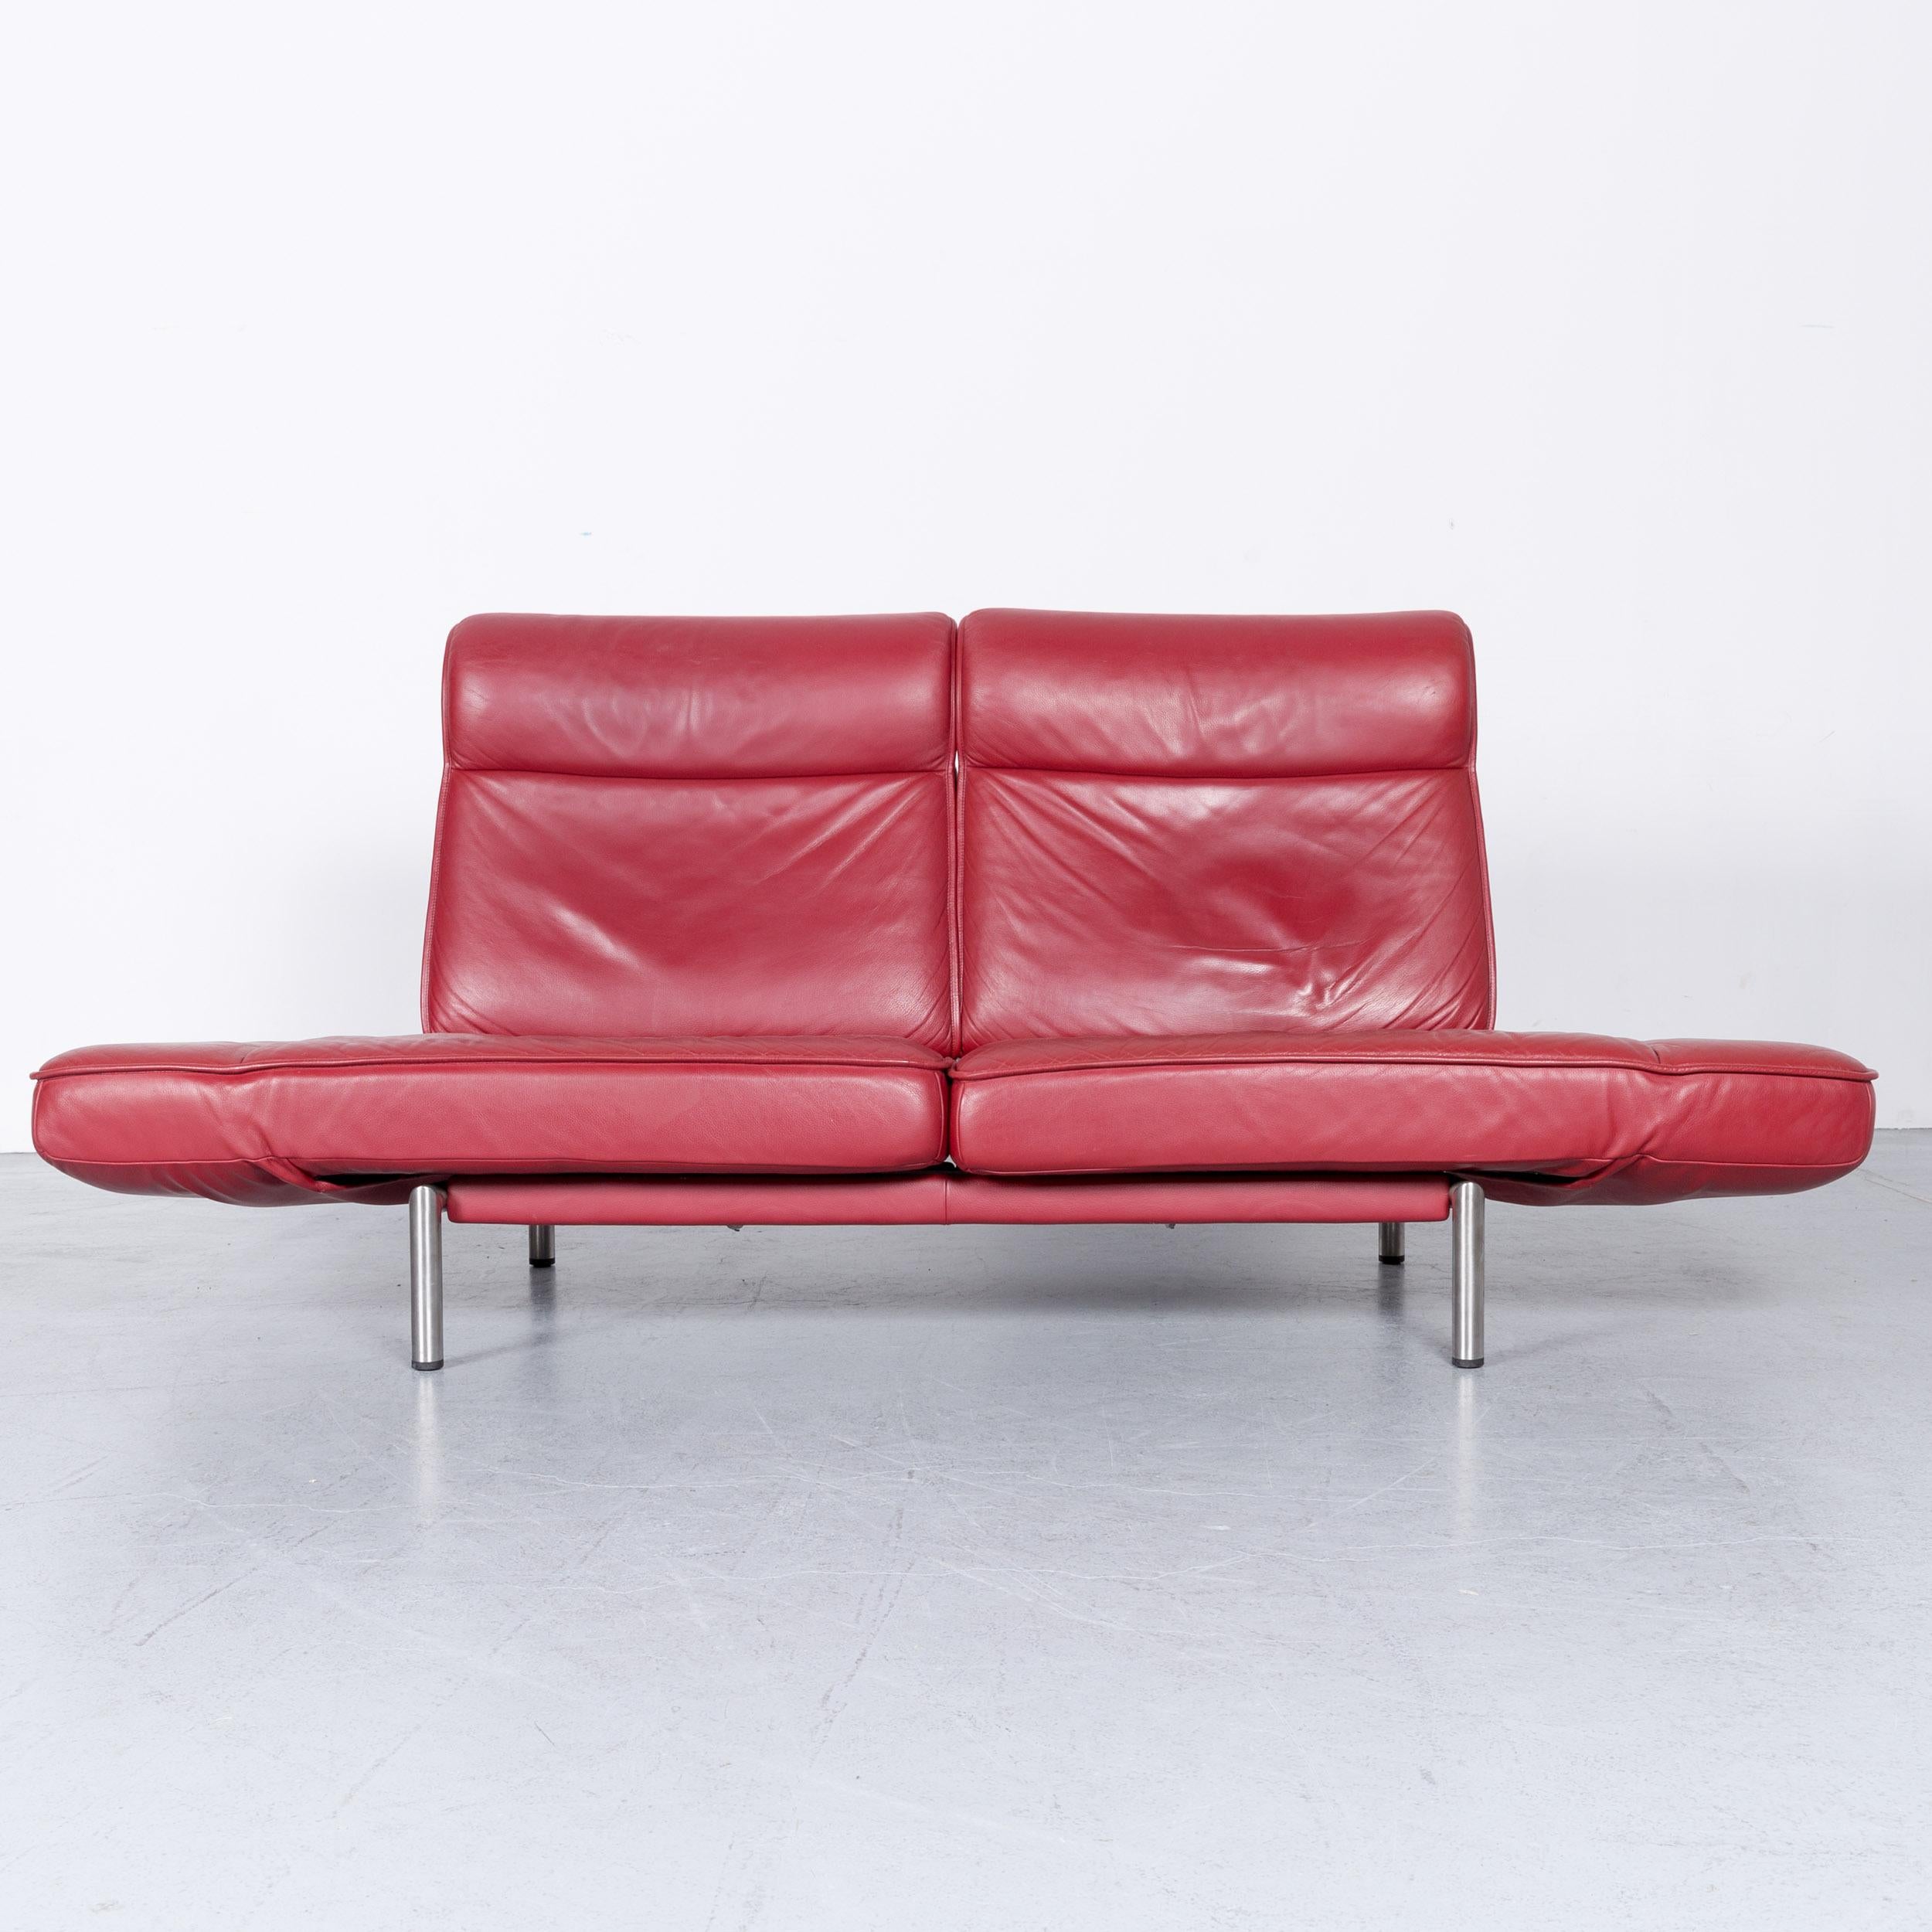 We bring to you an de Sede DS 450 designer sofa red leather two-seat couch made in Switzerland.